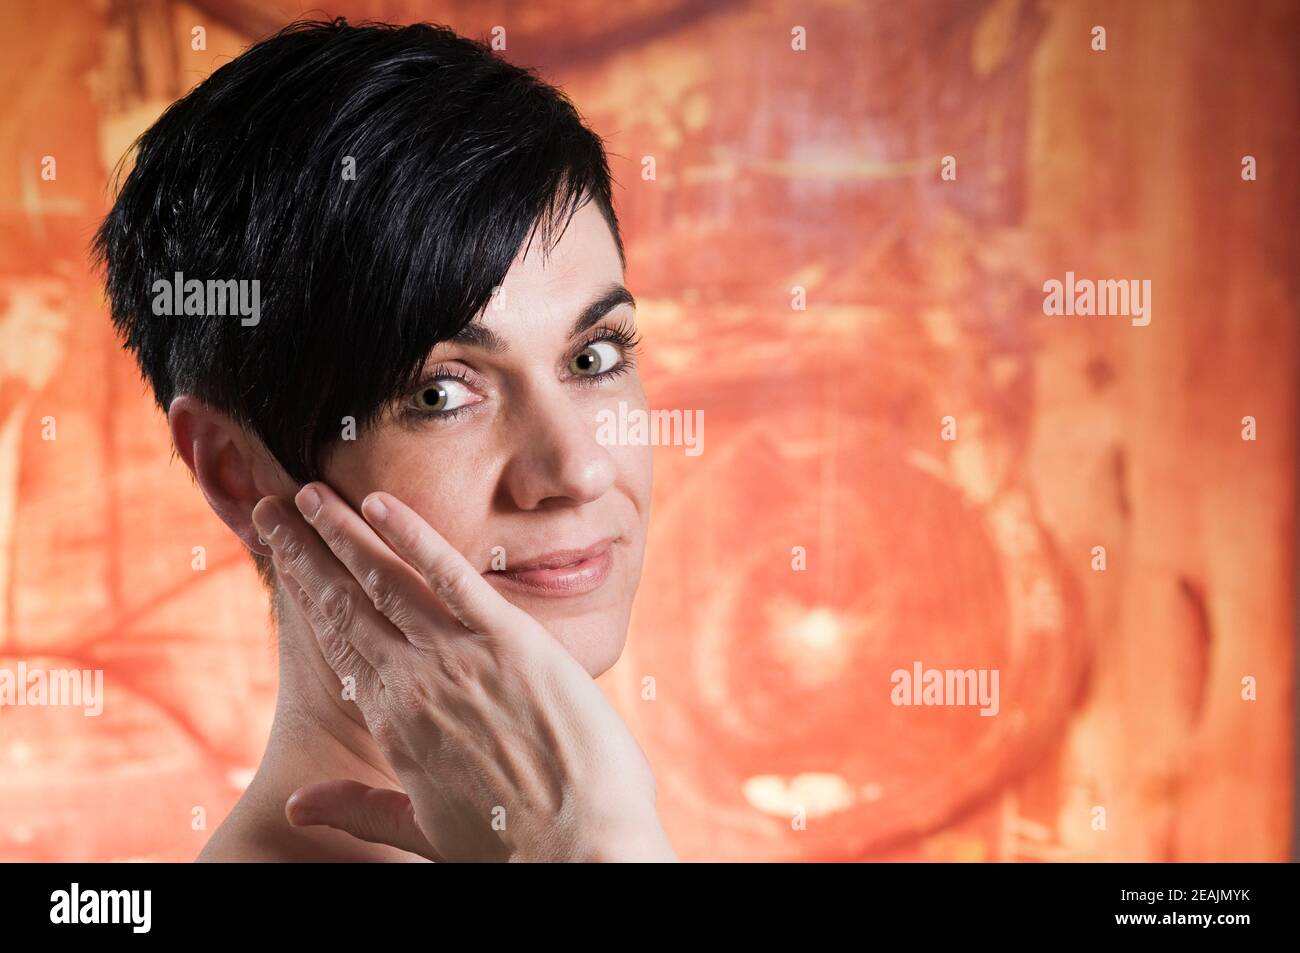 Delicate skin of woman Stock Photo